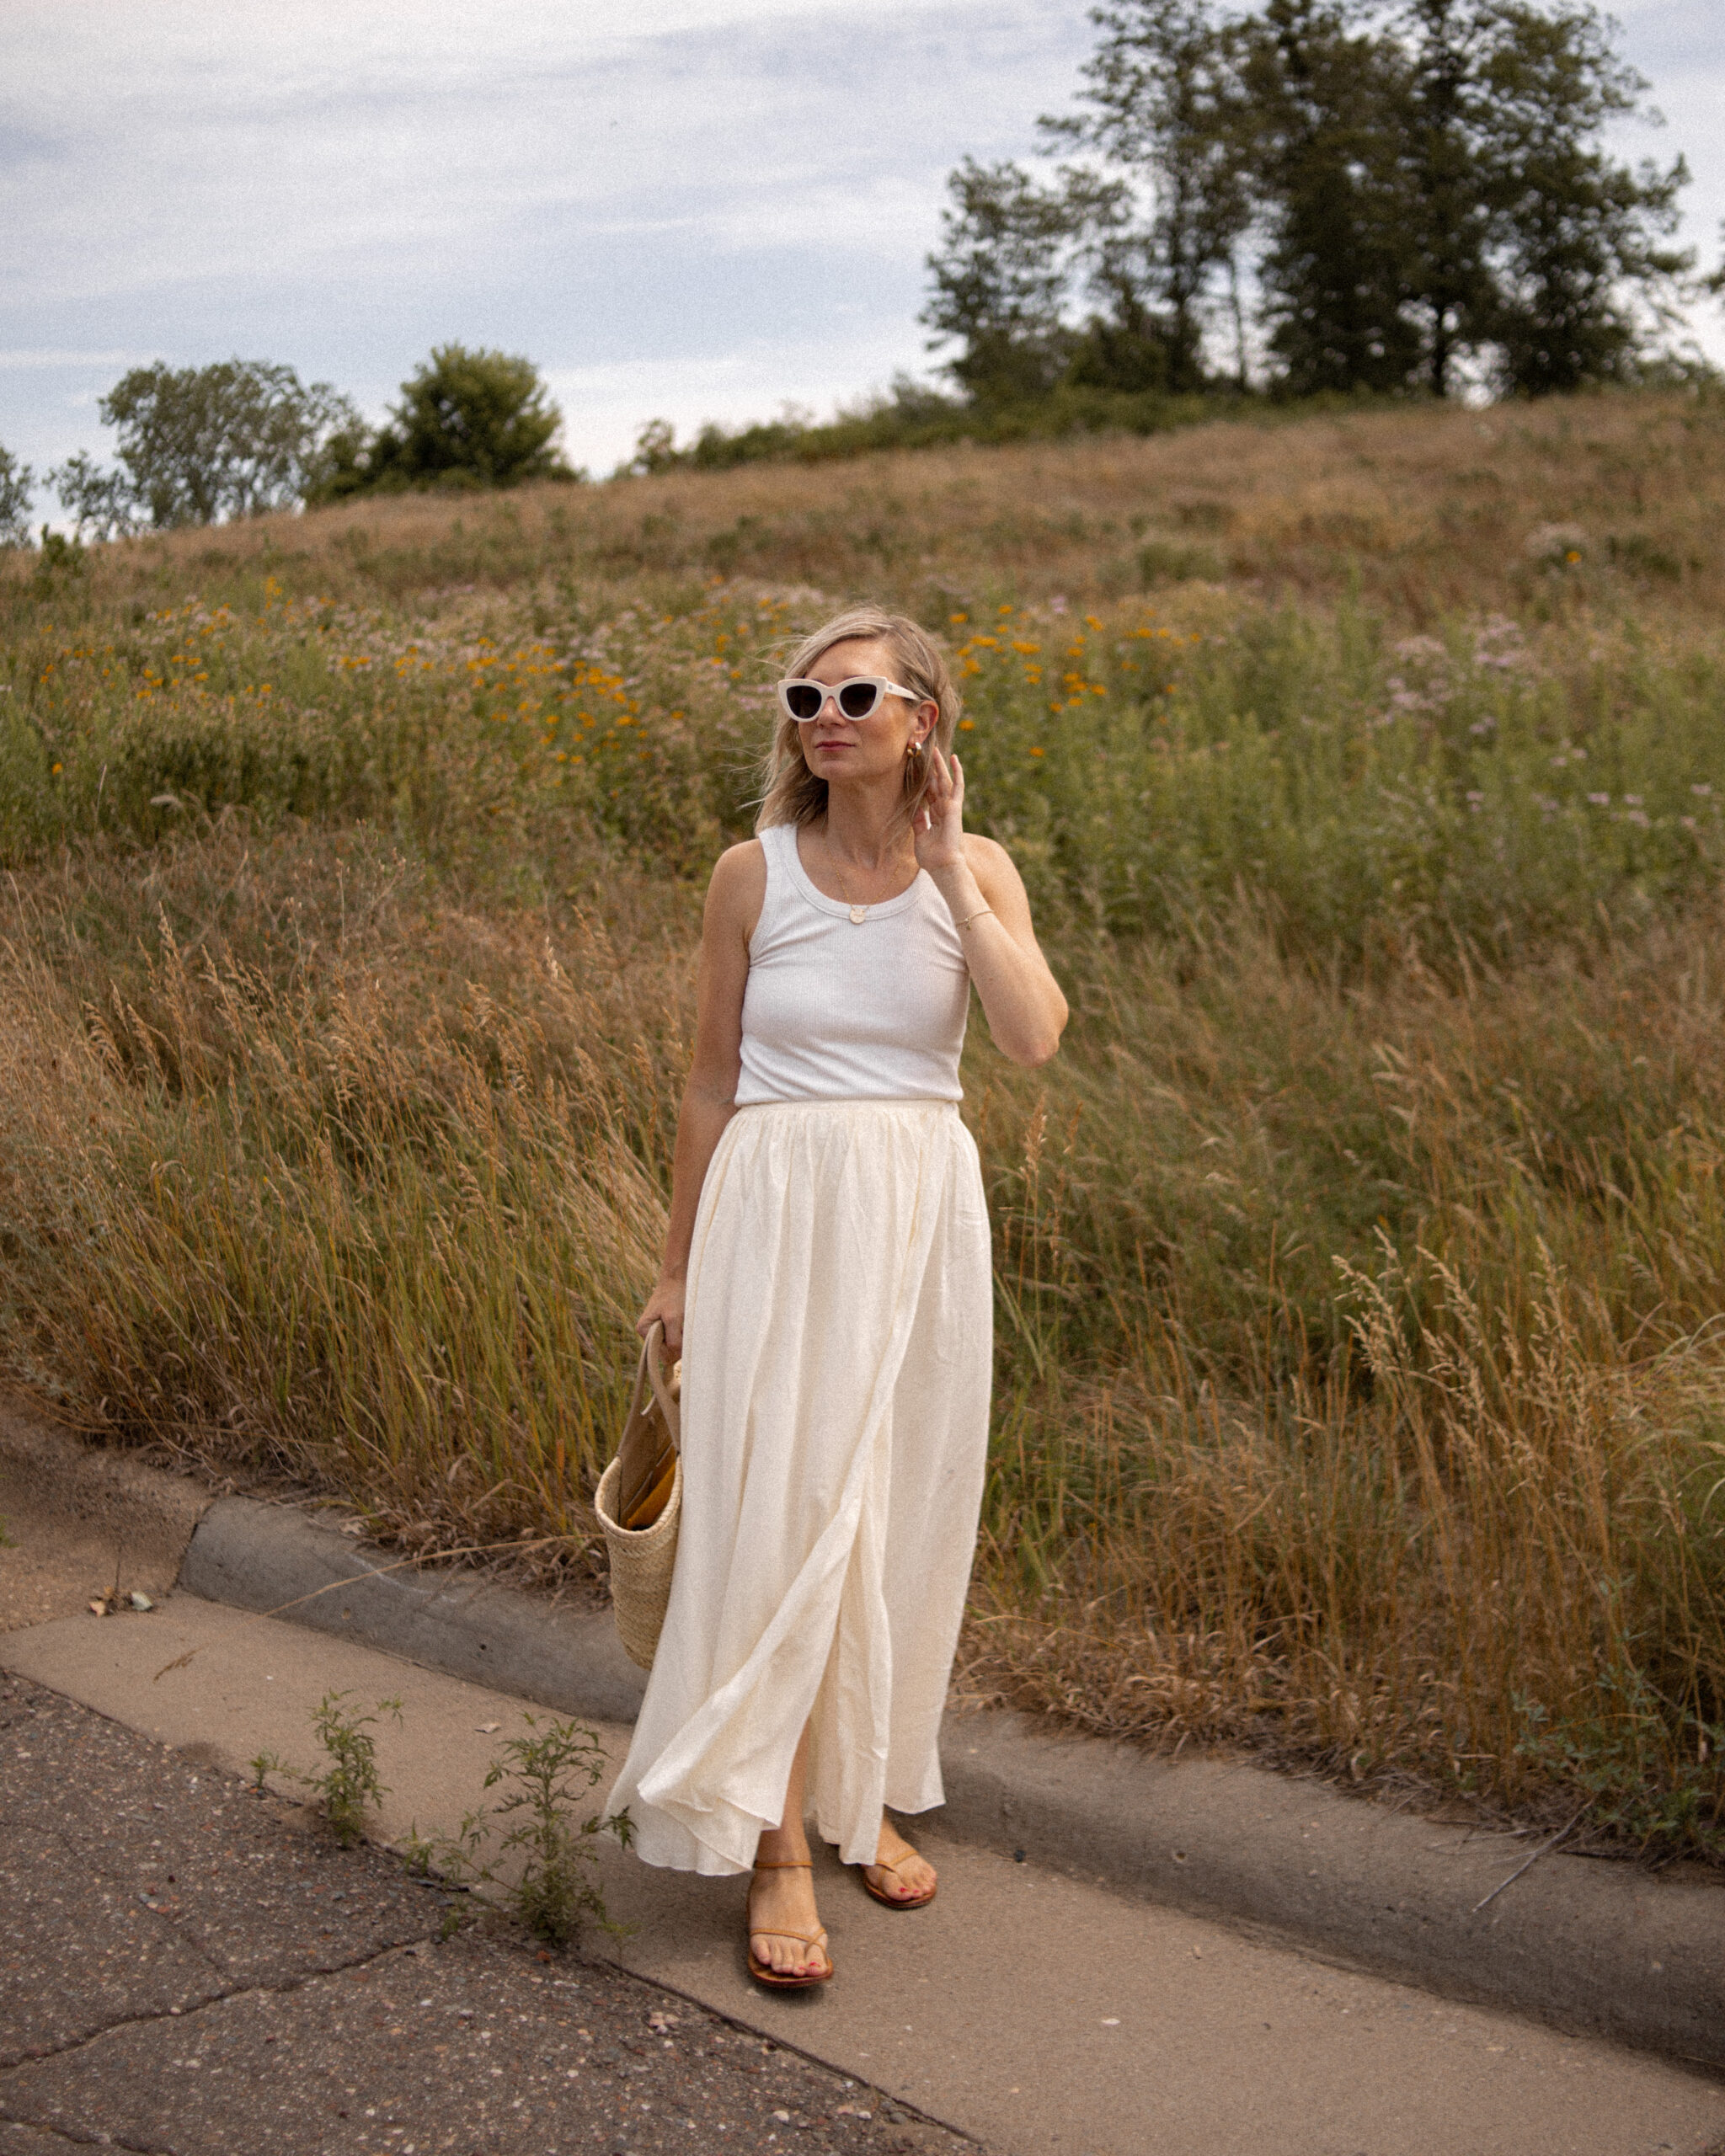 Karin Emily wears a cream wrap skirt and white tank top with white sunglasses and strappy sandals